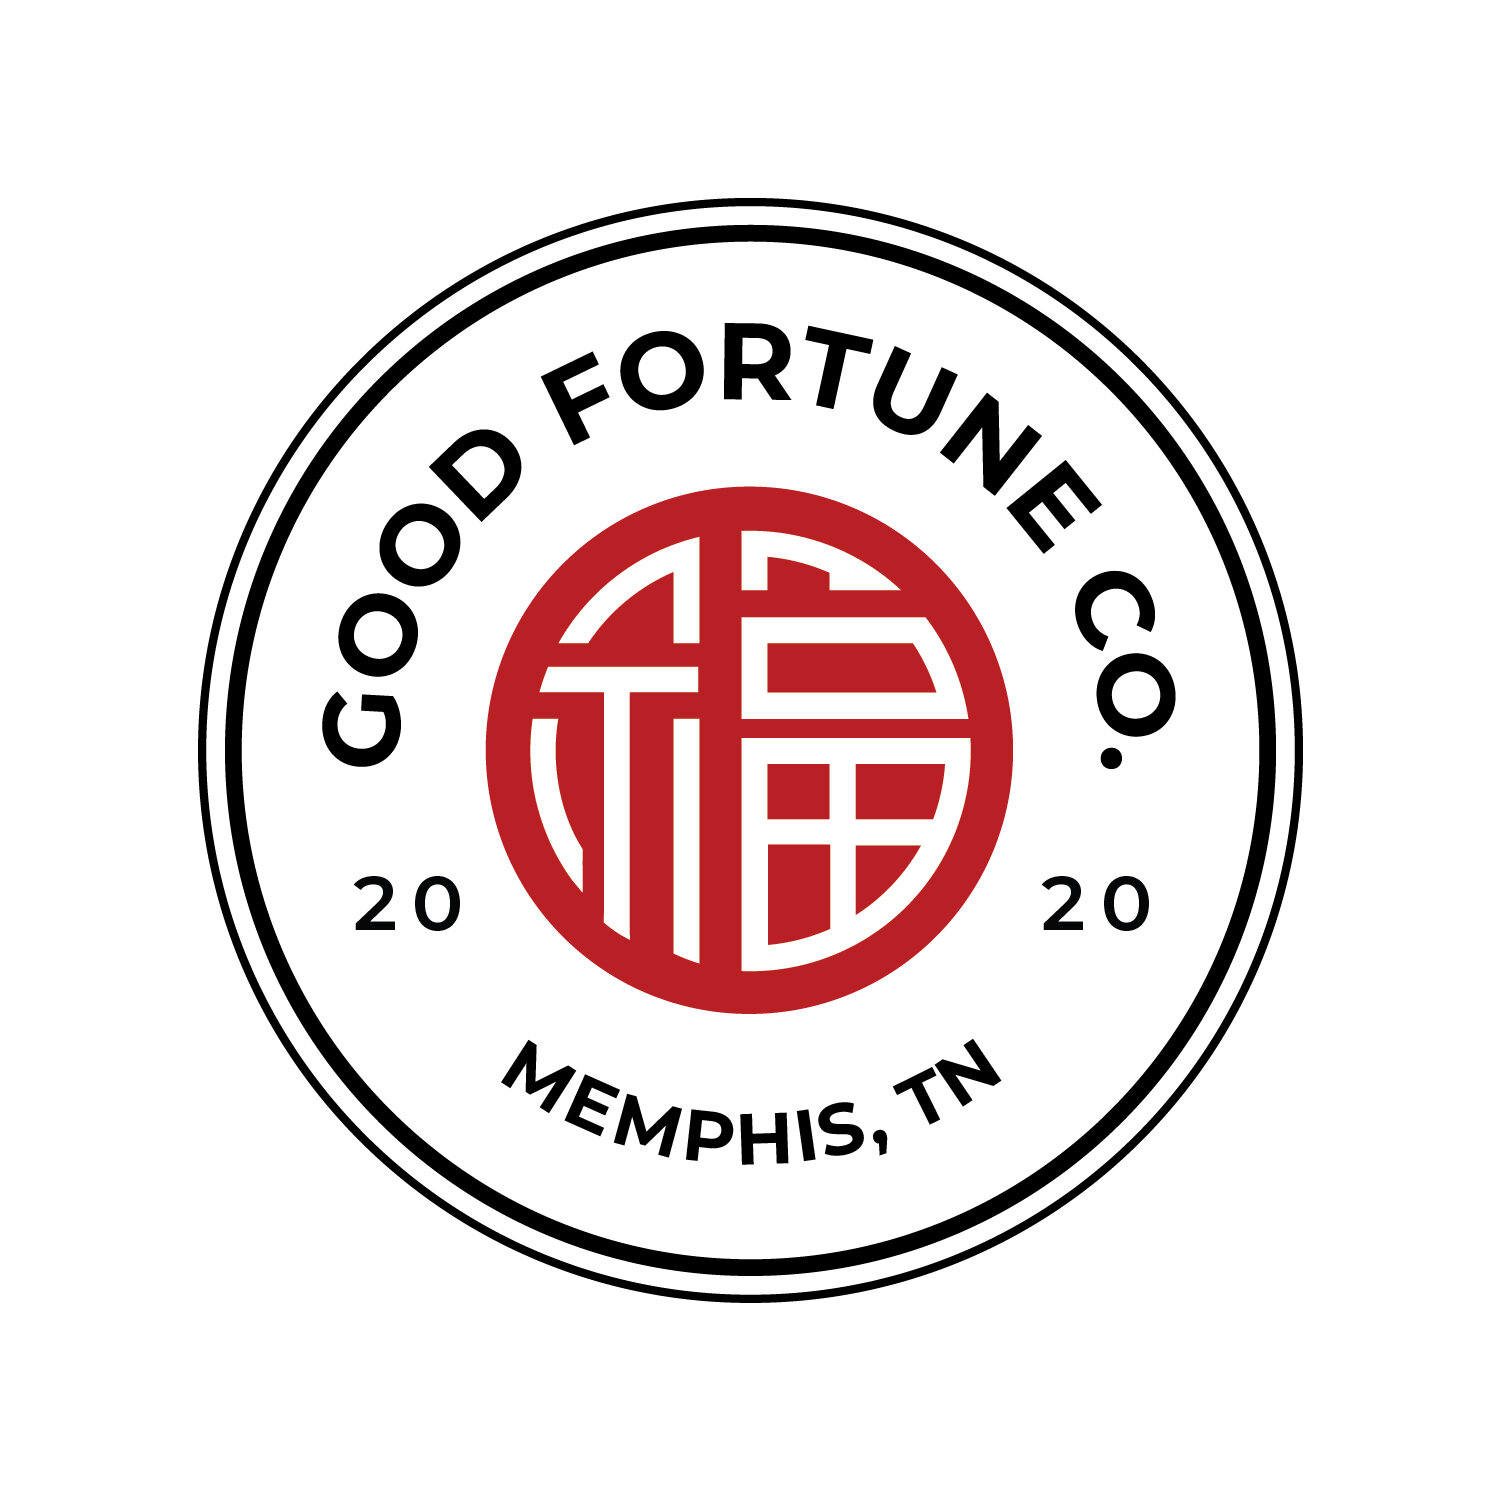 GOOD FORTUNE CO.